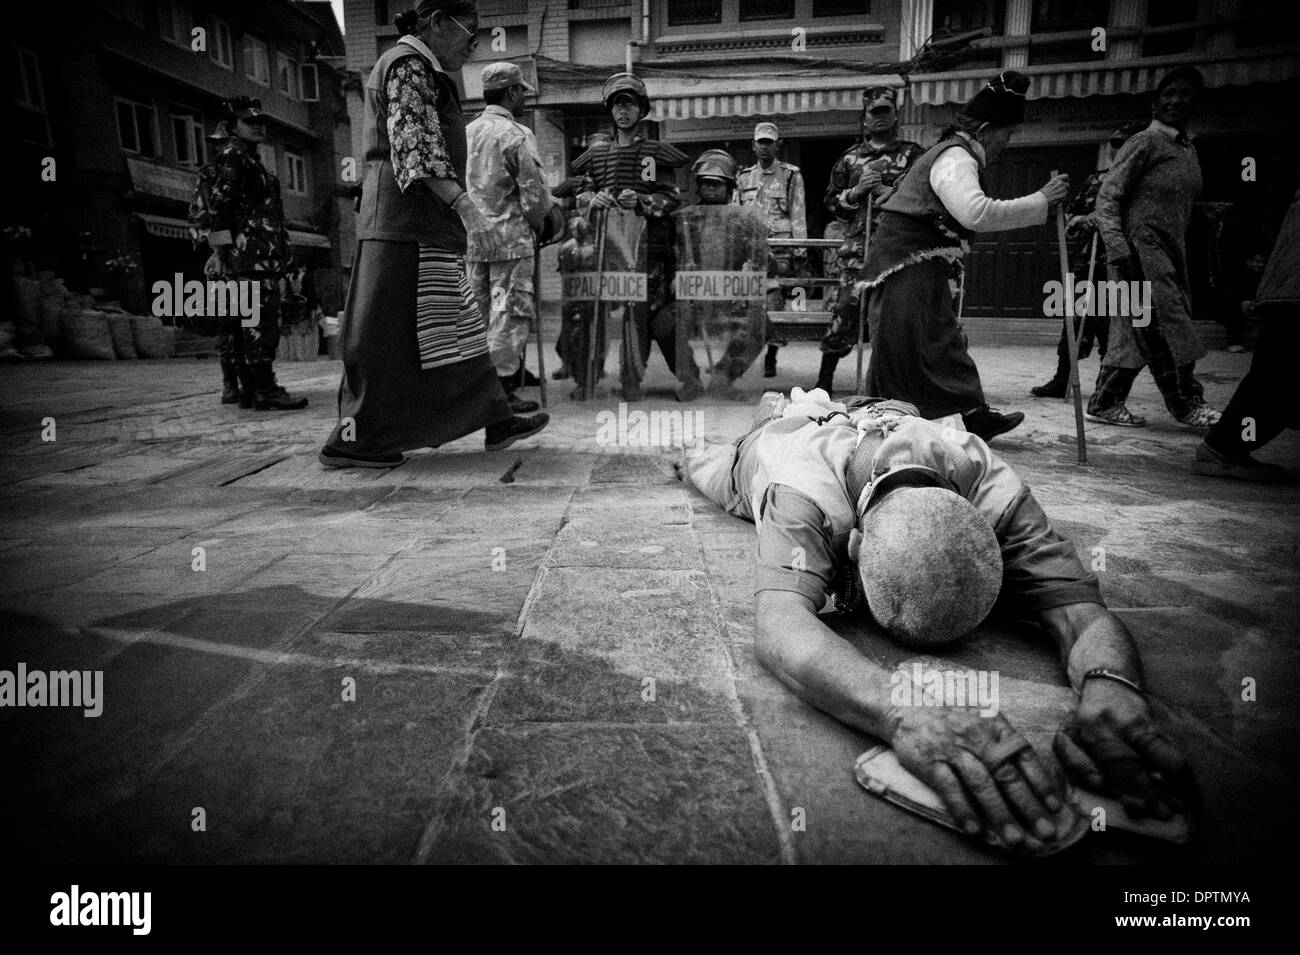 Buddhism in the kathmandu Black and White Stock Photos & Images - Alamy